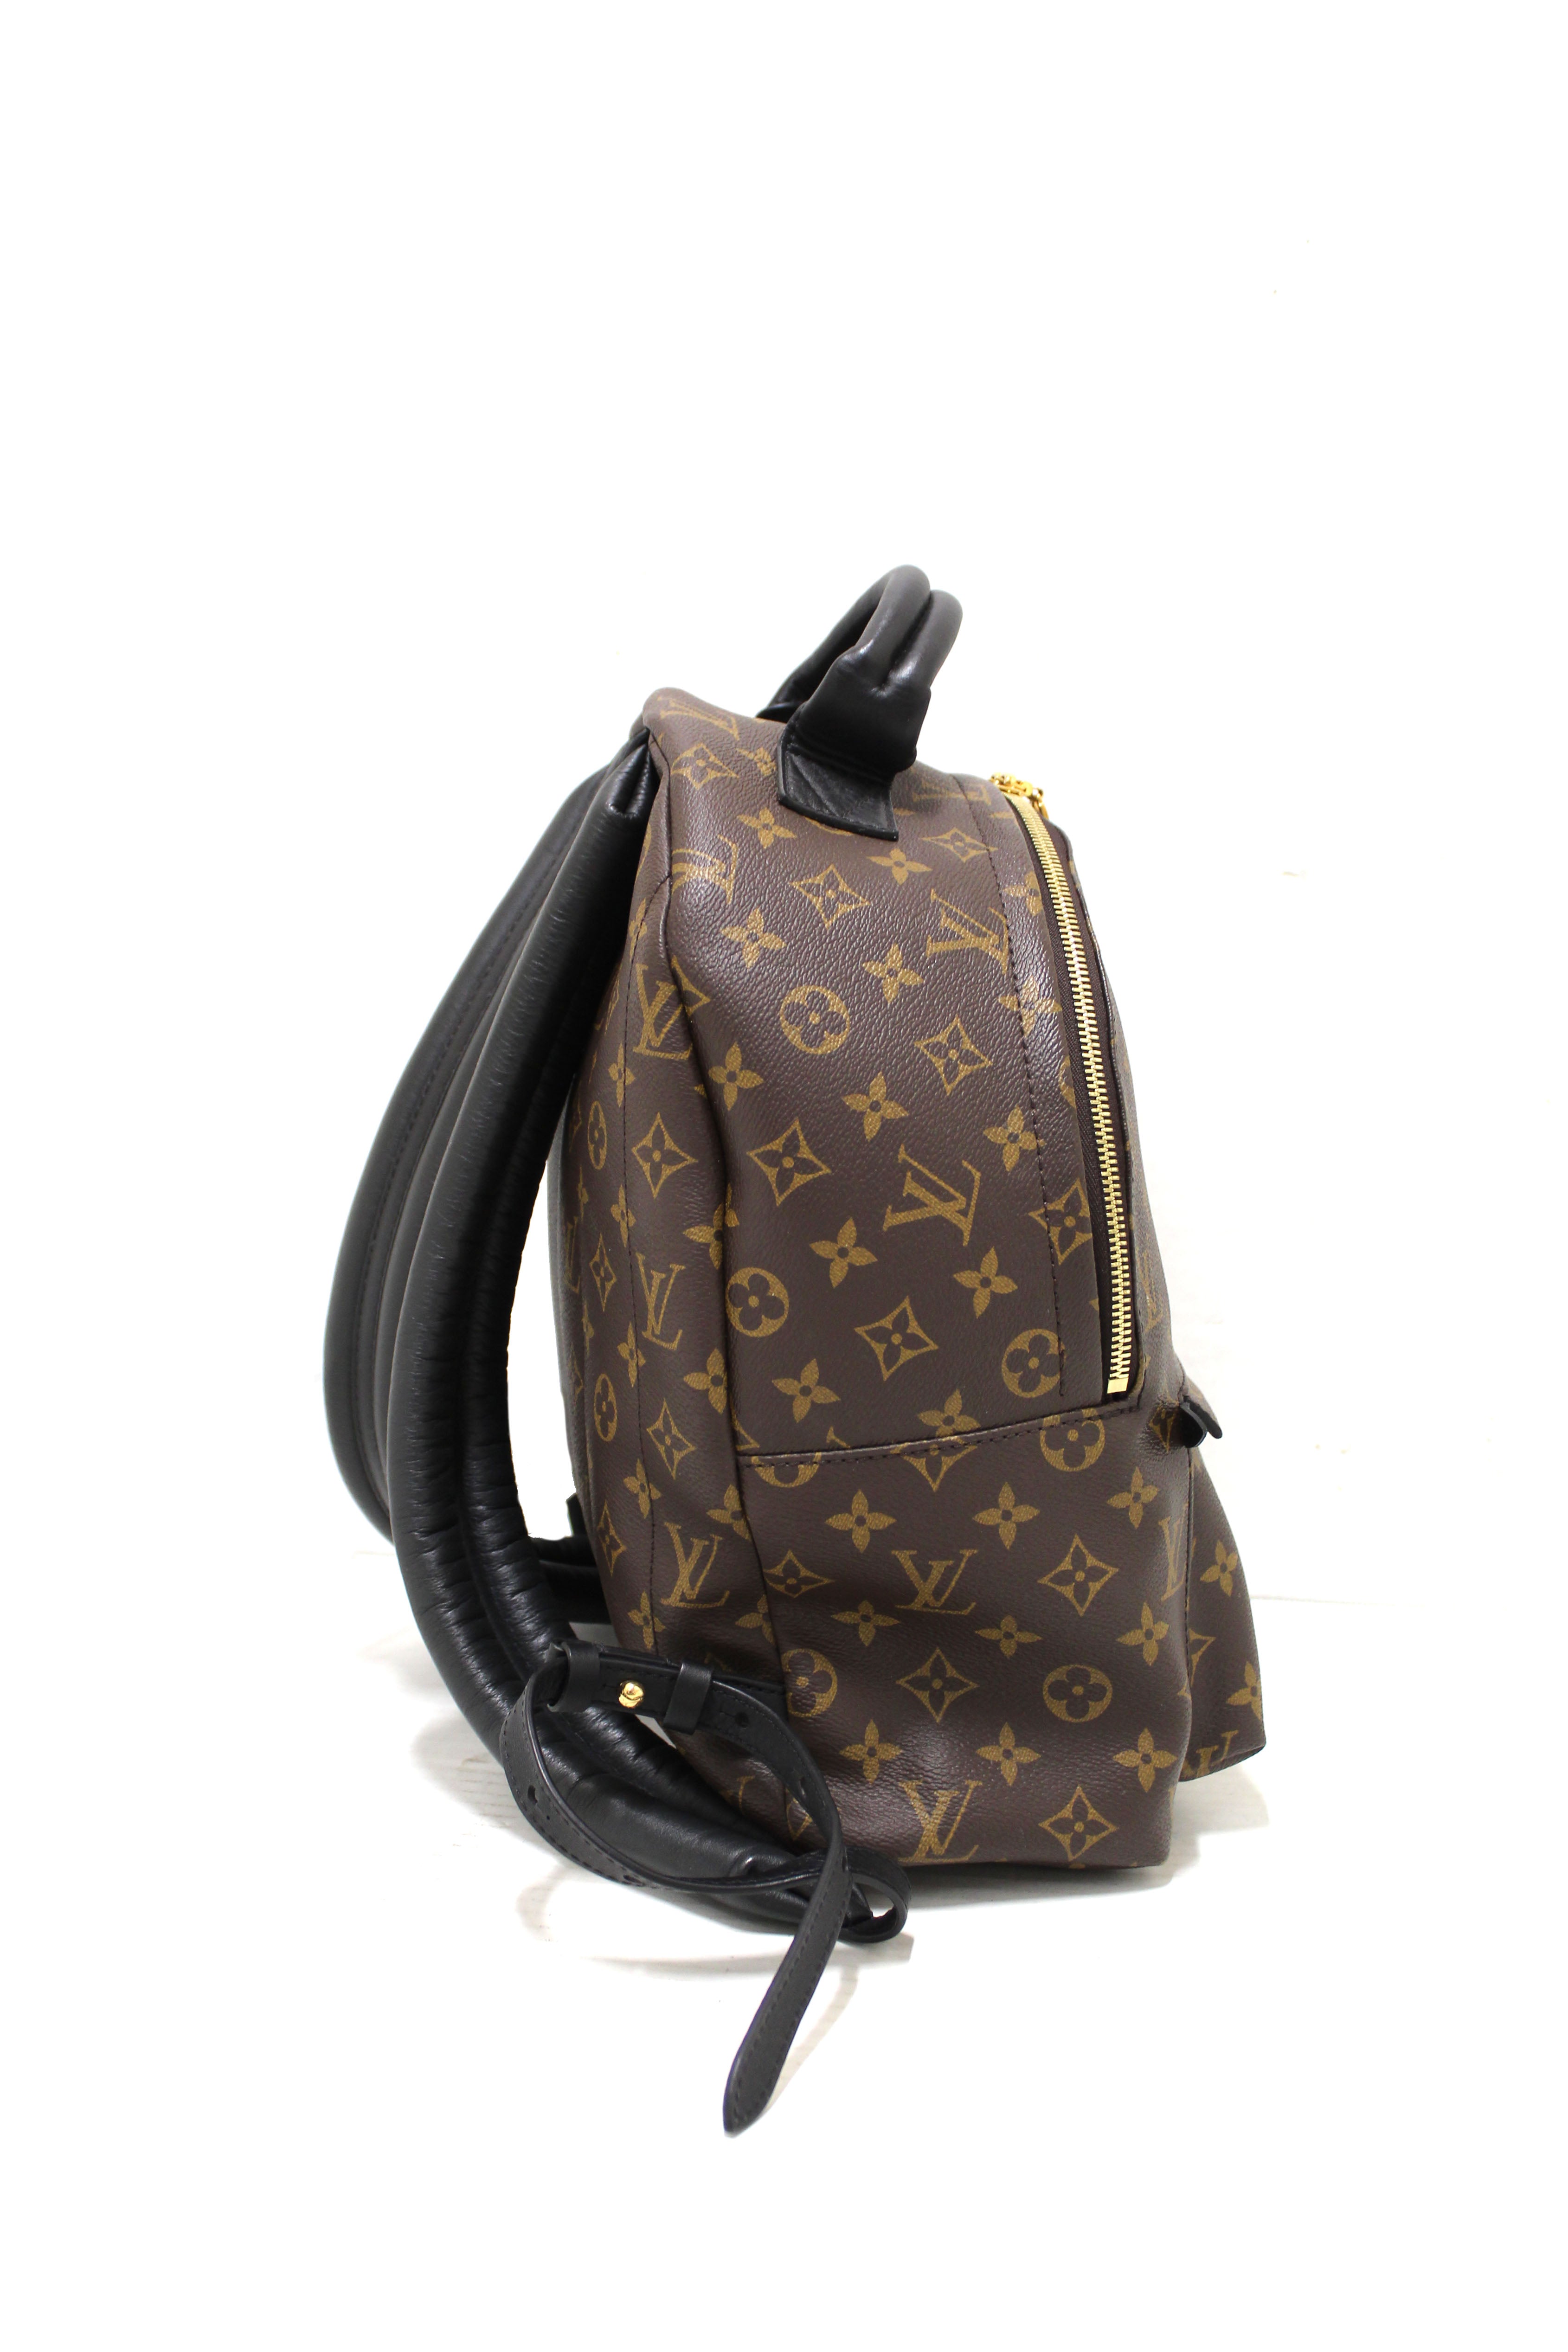 Authentic Louis Vuitton Classic Monogram Palm Springs MM Backpack